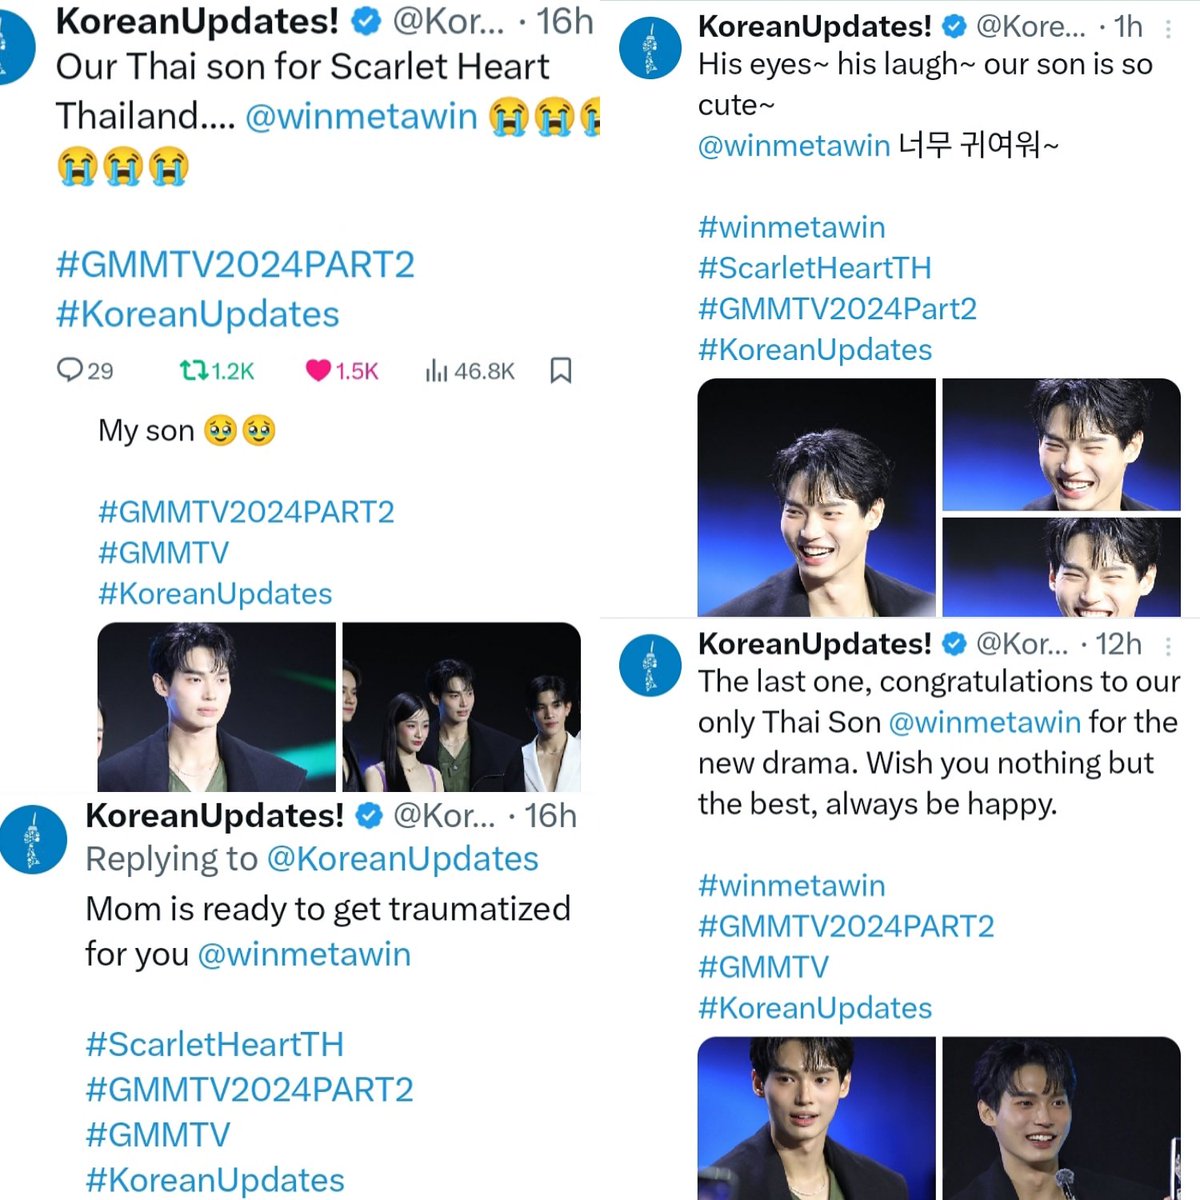 The way @KoreanUpdates keep updating about Win, congrats Win and called him as their only Thai son 😭😭😭😭 Please, I've found this is the cutest of them น่าเอ็นดูมาก

WIN GMMTV2024 P2
#ScarletHeartTH
#GMMTV2024PART2
#winmetawin️  @winmetawin